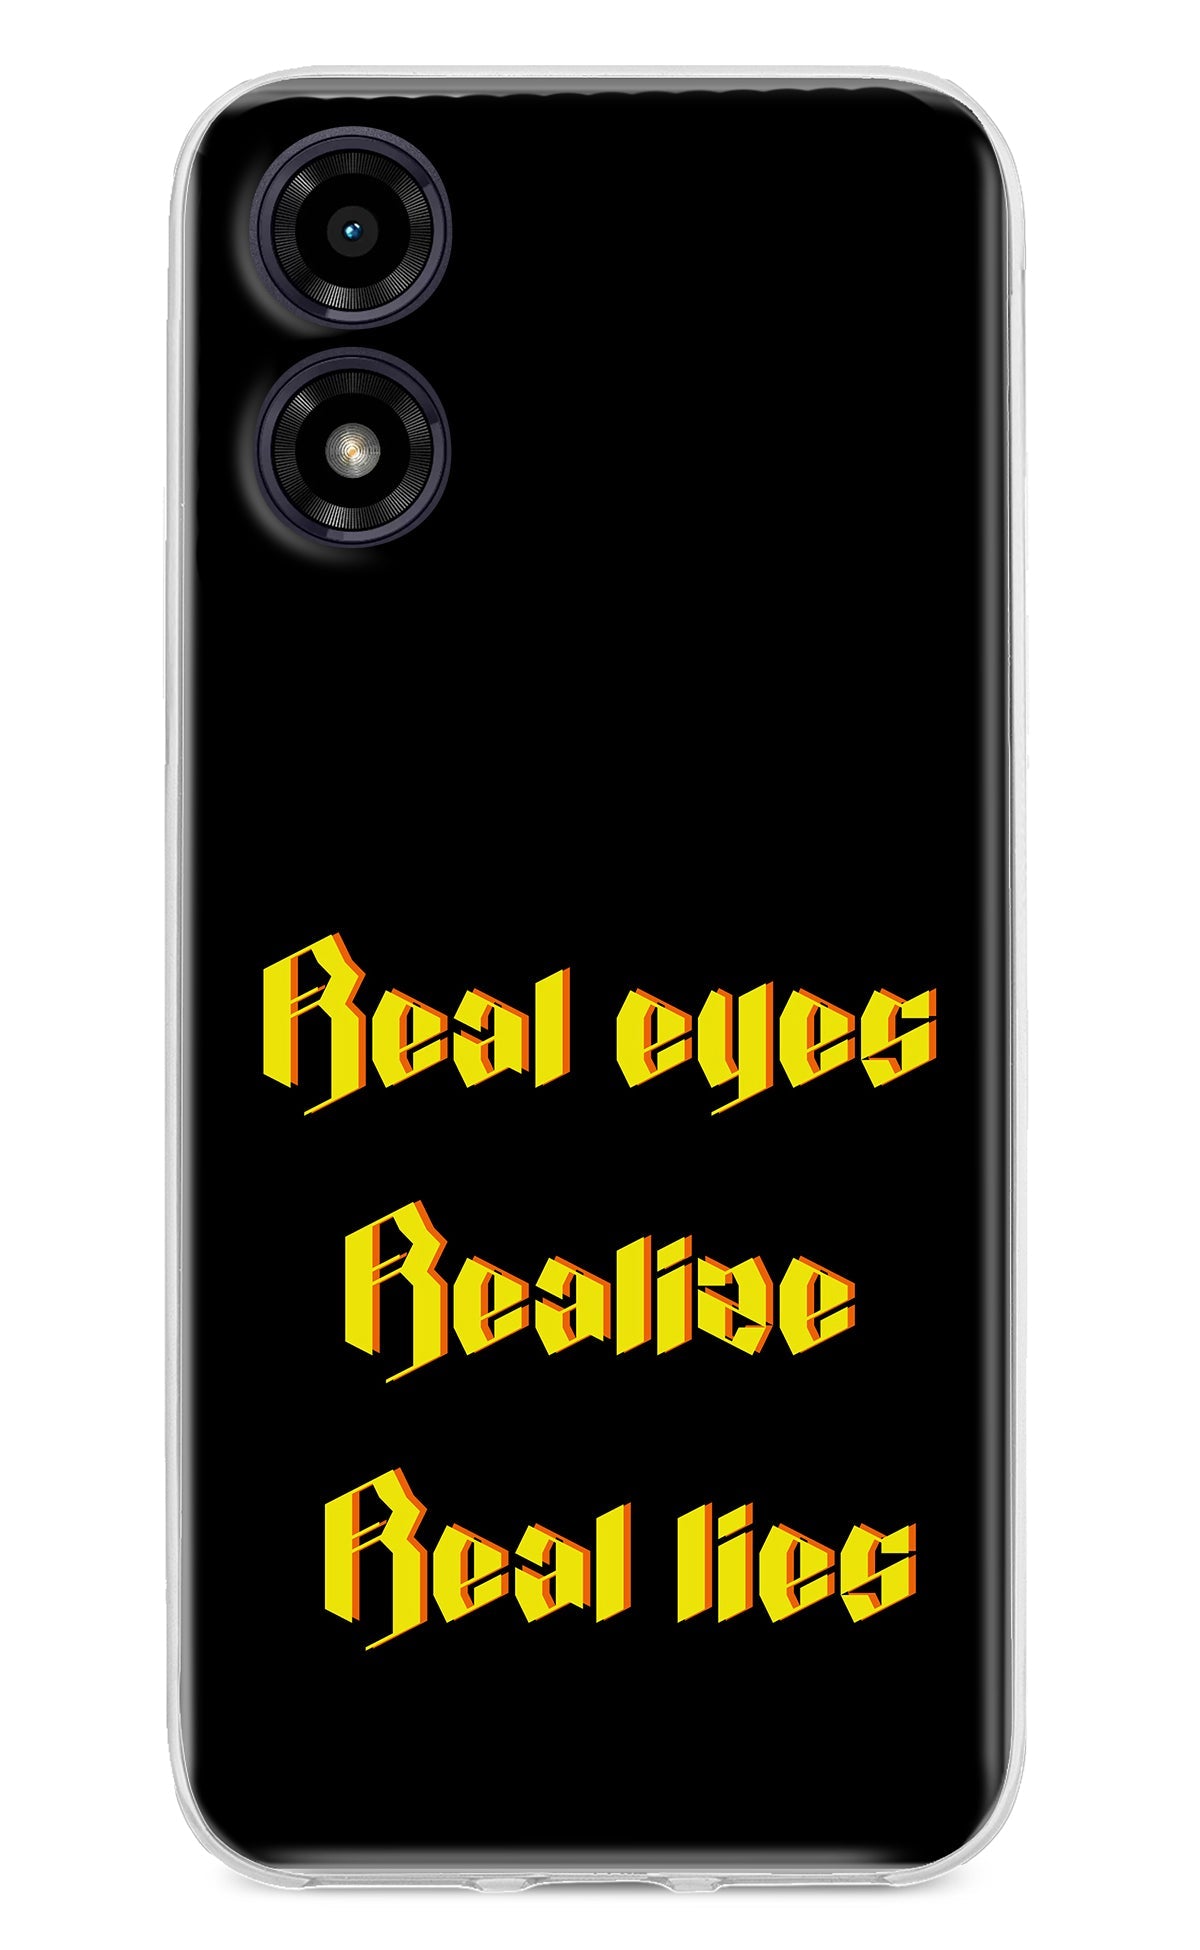 Real Eyes Realize Real Lies Moto G04 Back Cover